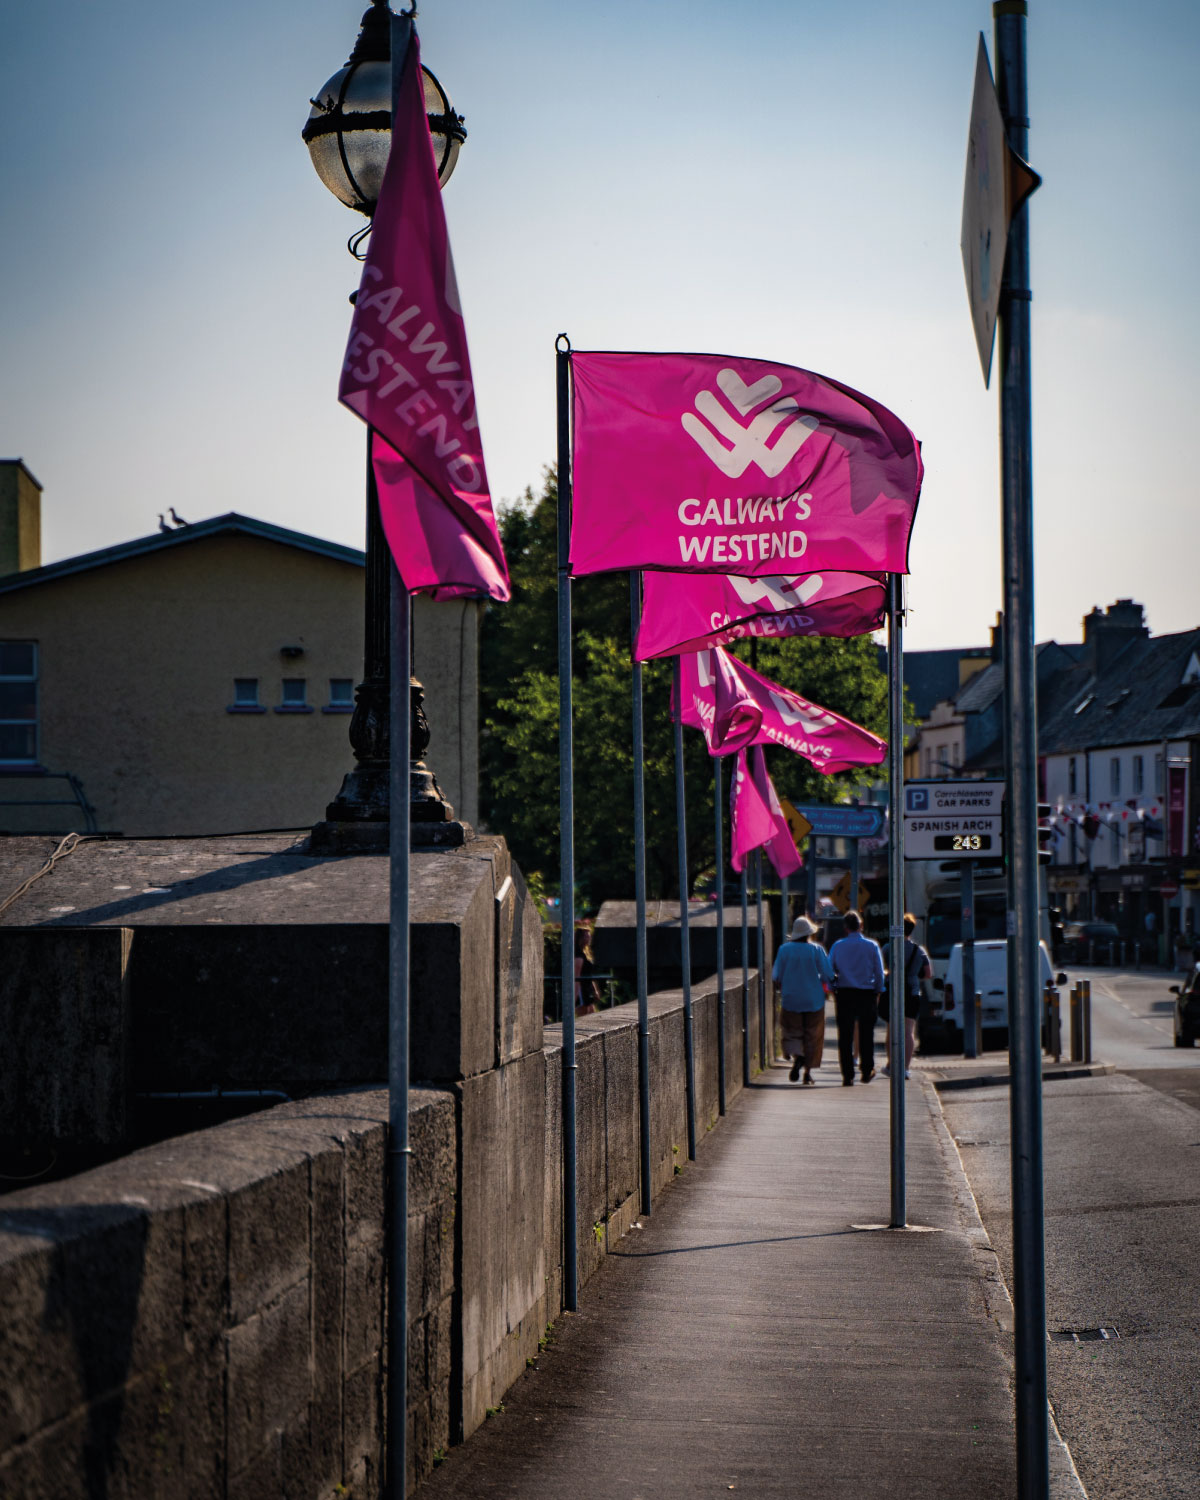 Galway's Westend Walking Tours